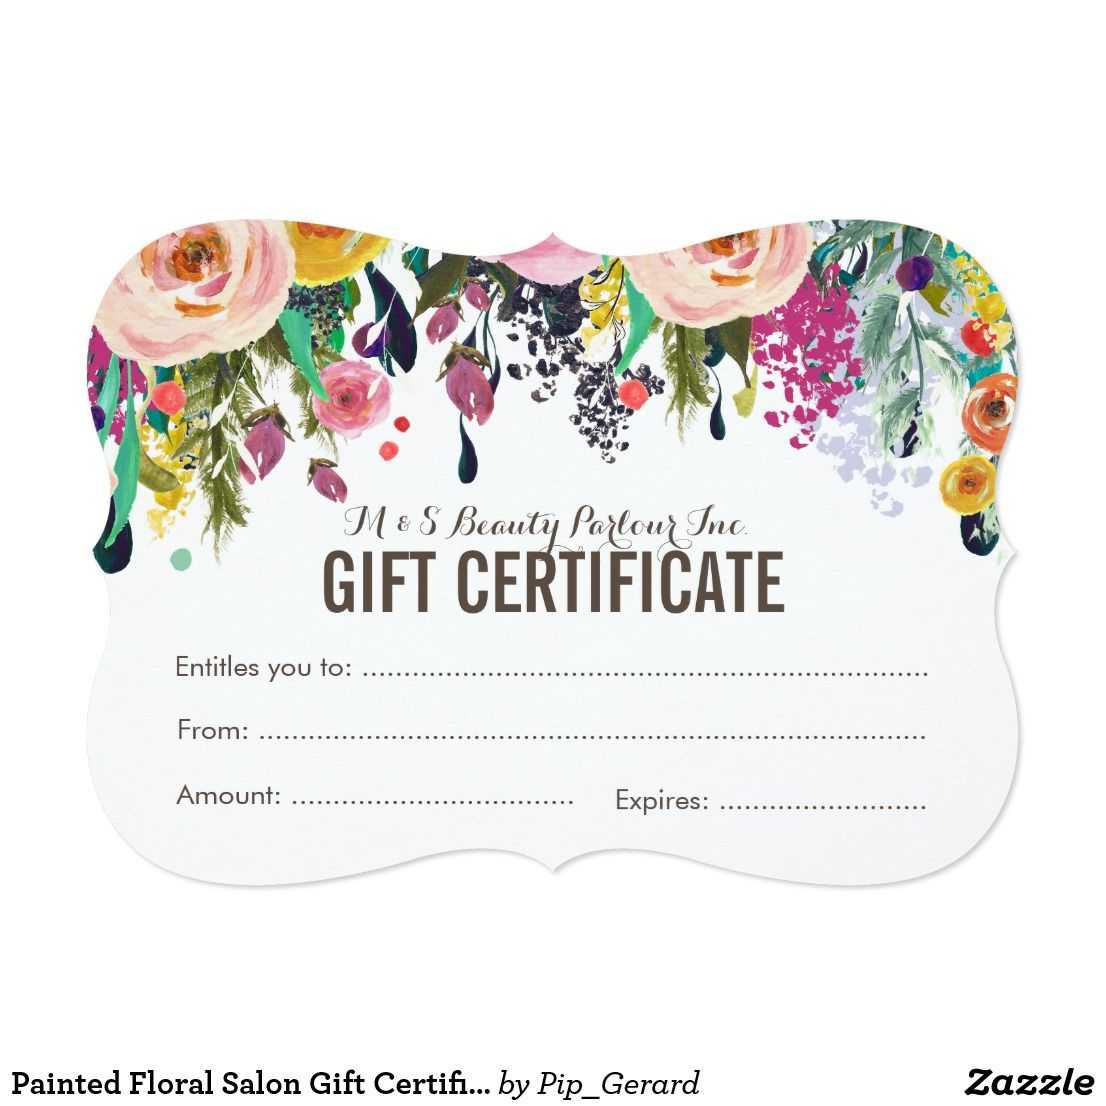 Painted Floral Salon Gift Certificate Template | Zazzle With Regard To Salon Gift Certificate Template